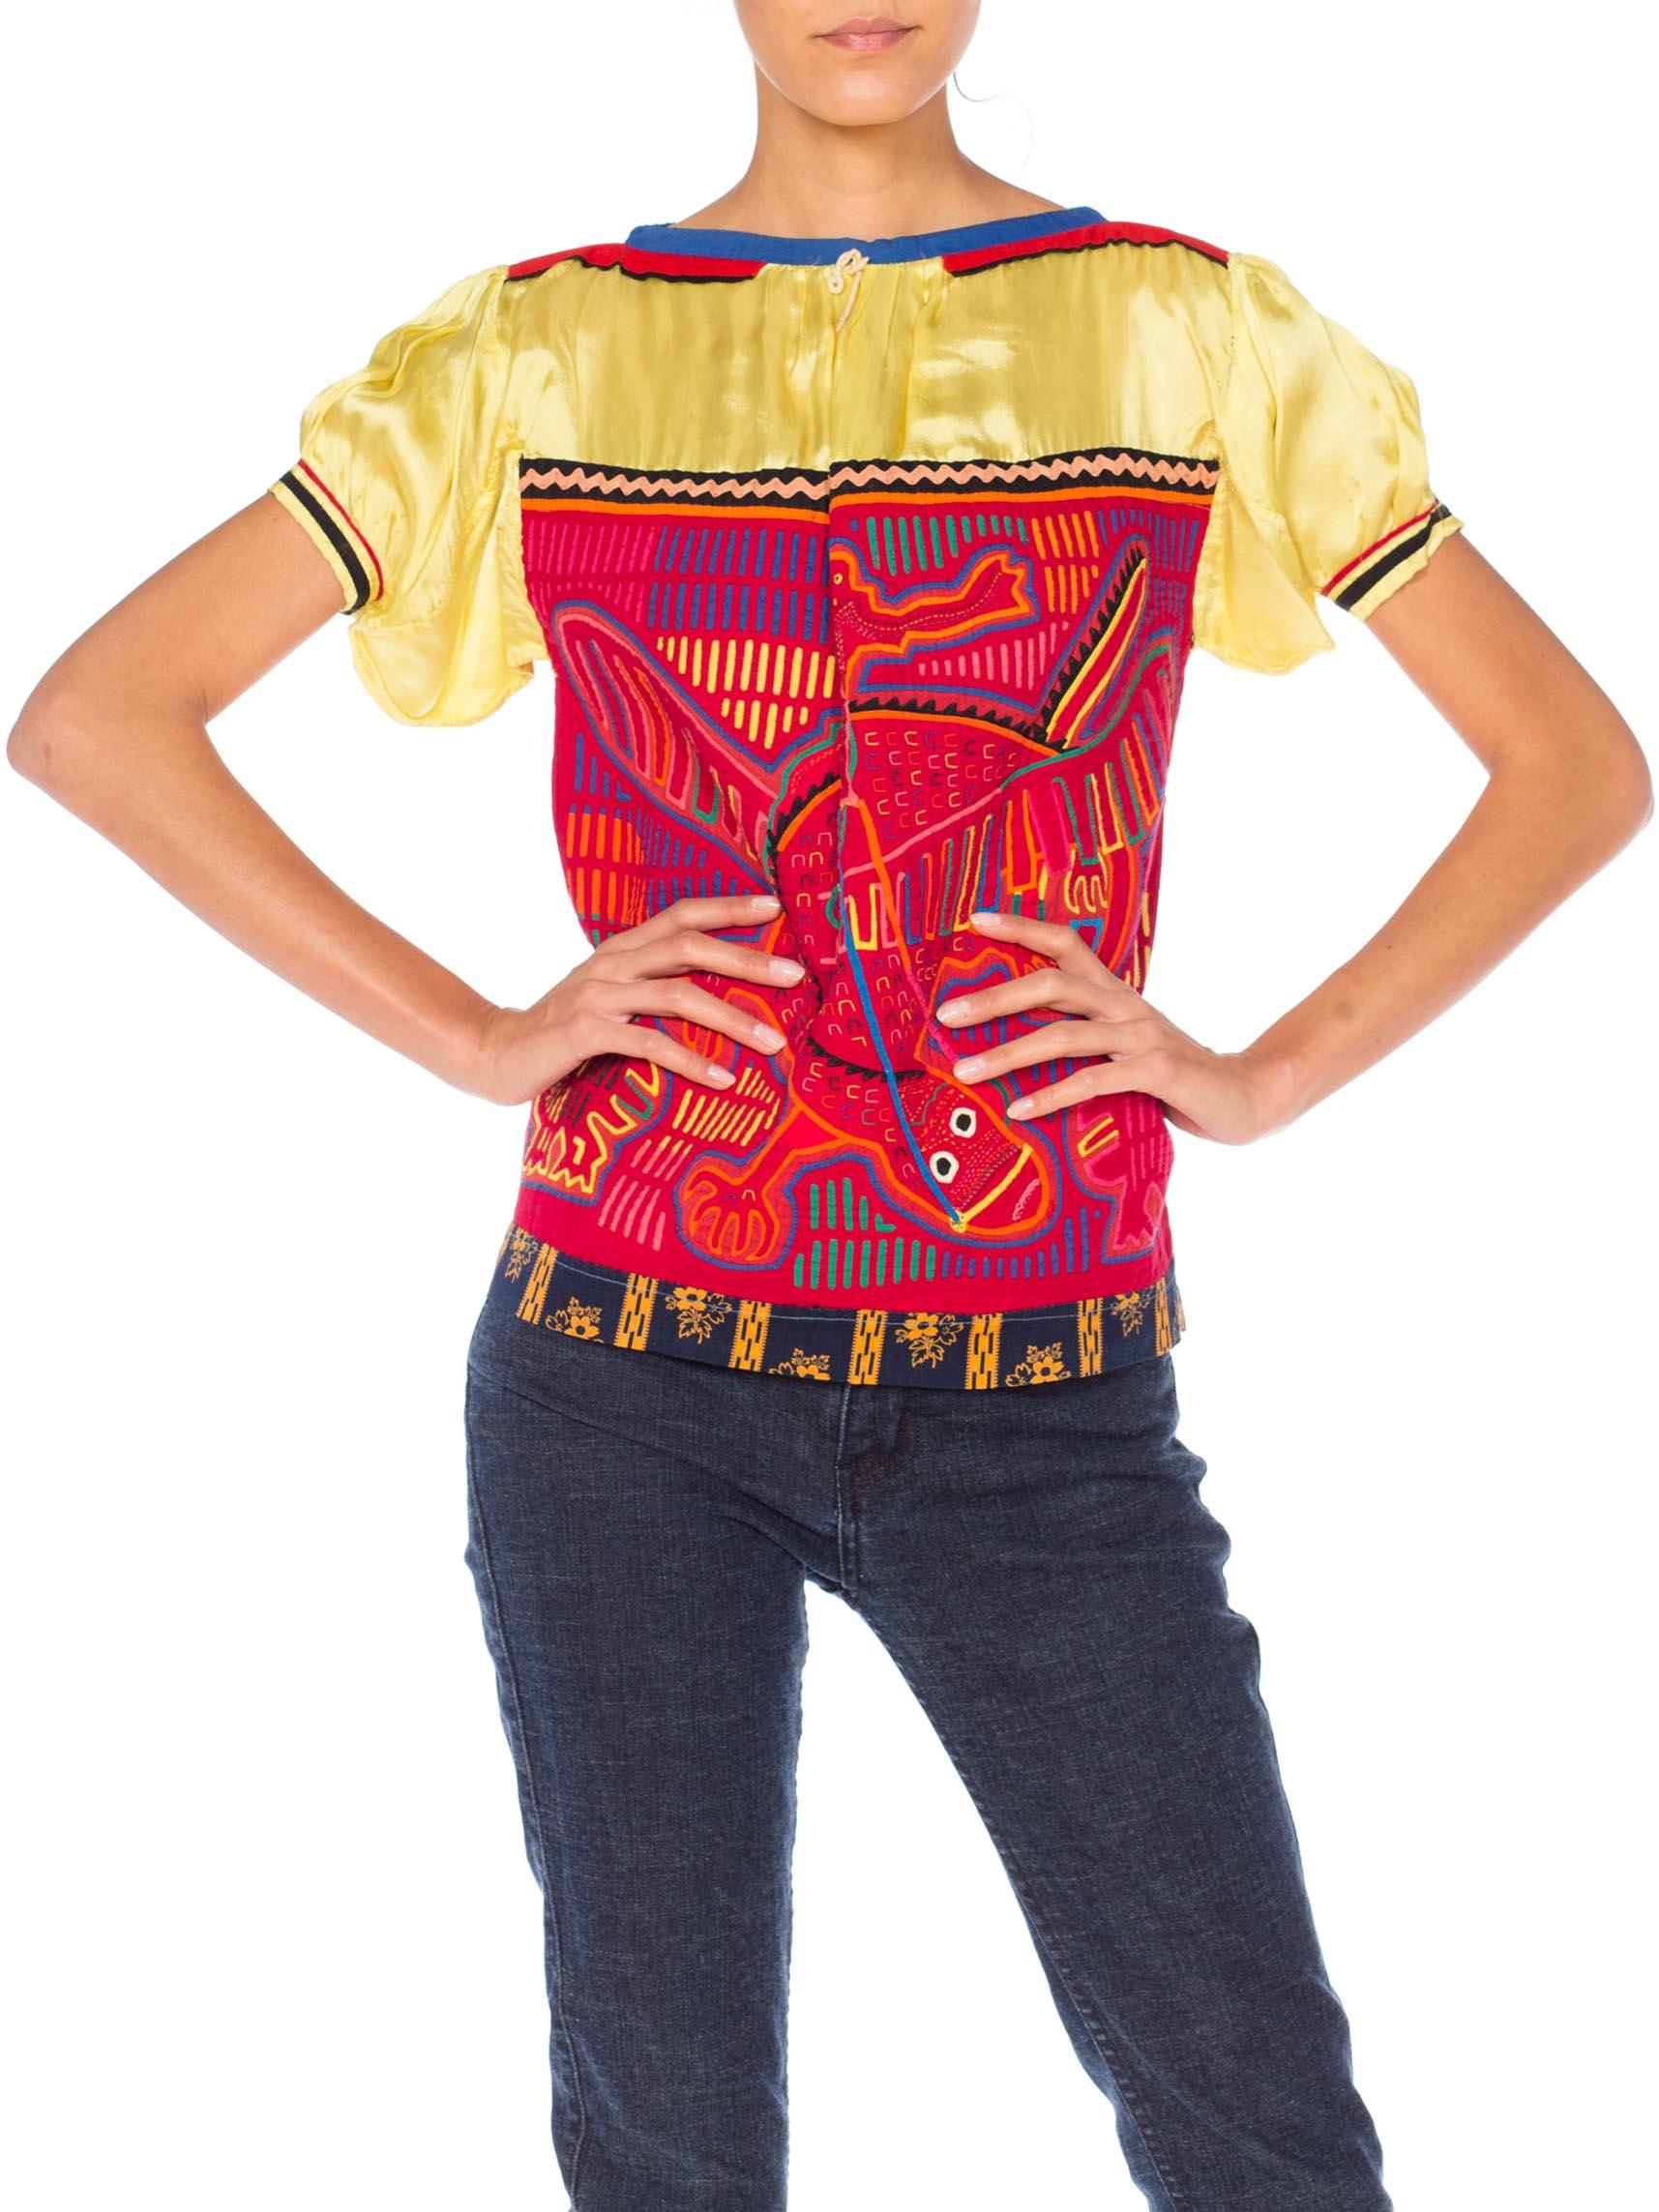 1960S Red & Yellow Cotton South American Top Appliquéd With Lizard And Birds For Sale 1